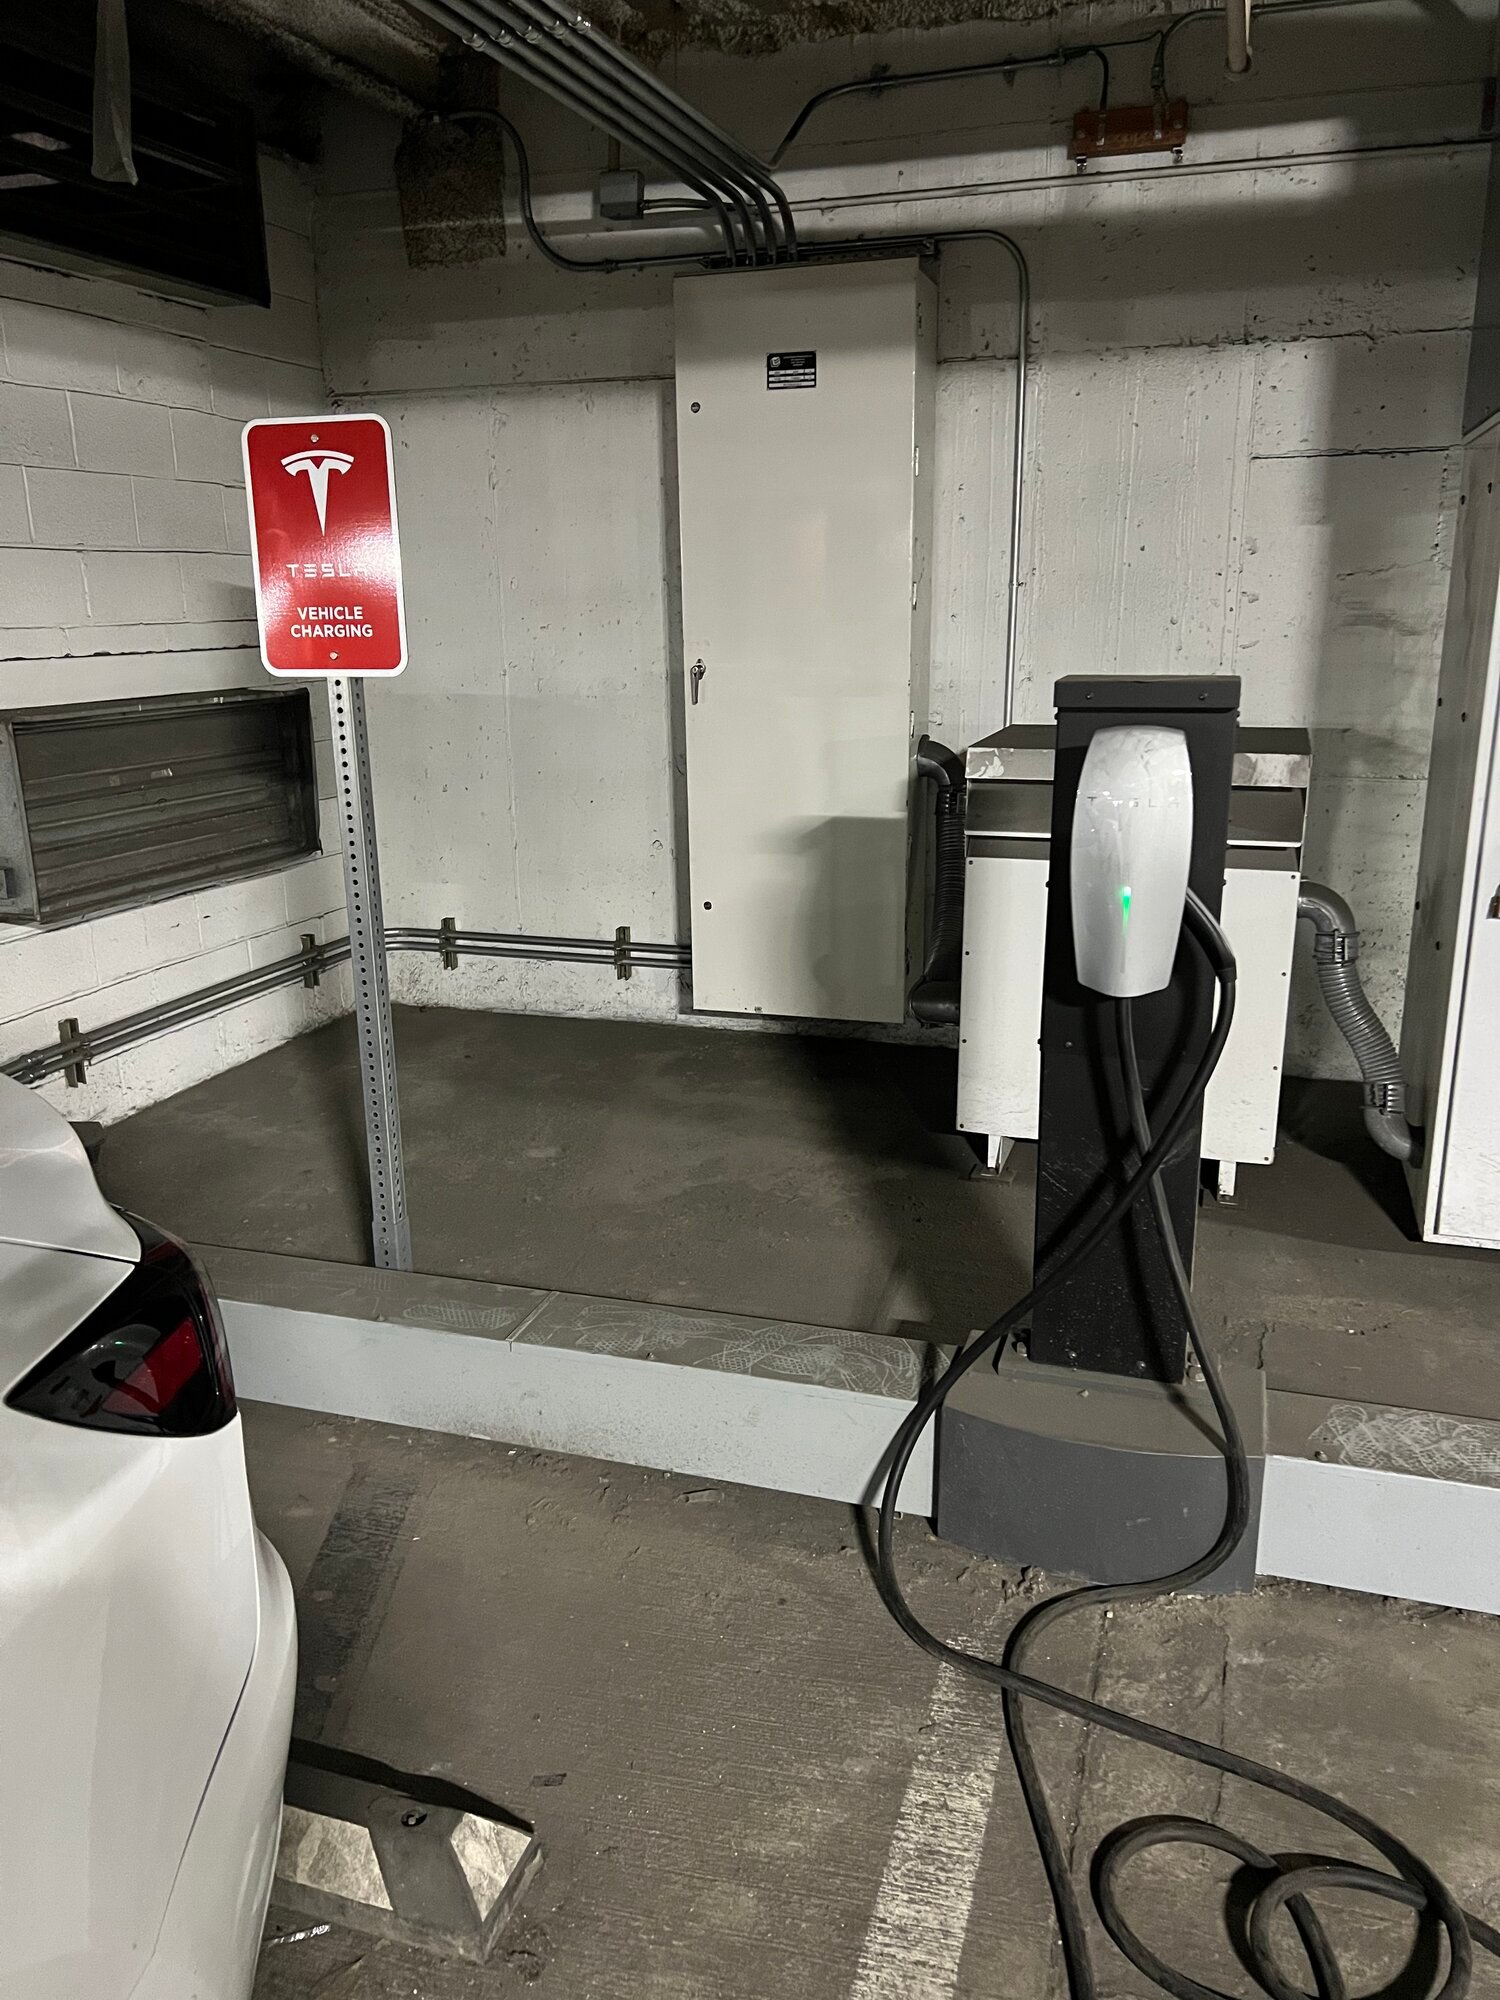 Ccs1 To Tesla Adapter Dc Supercharger for Car 250kw Home Ev